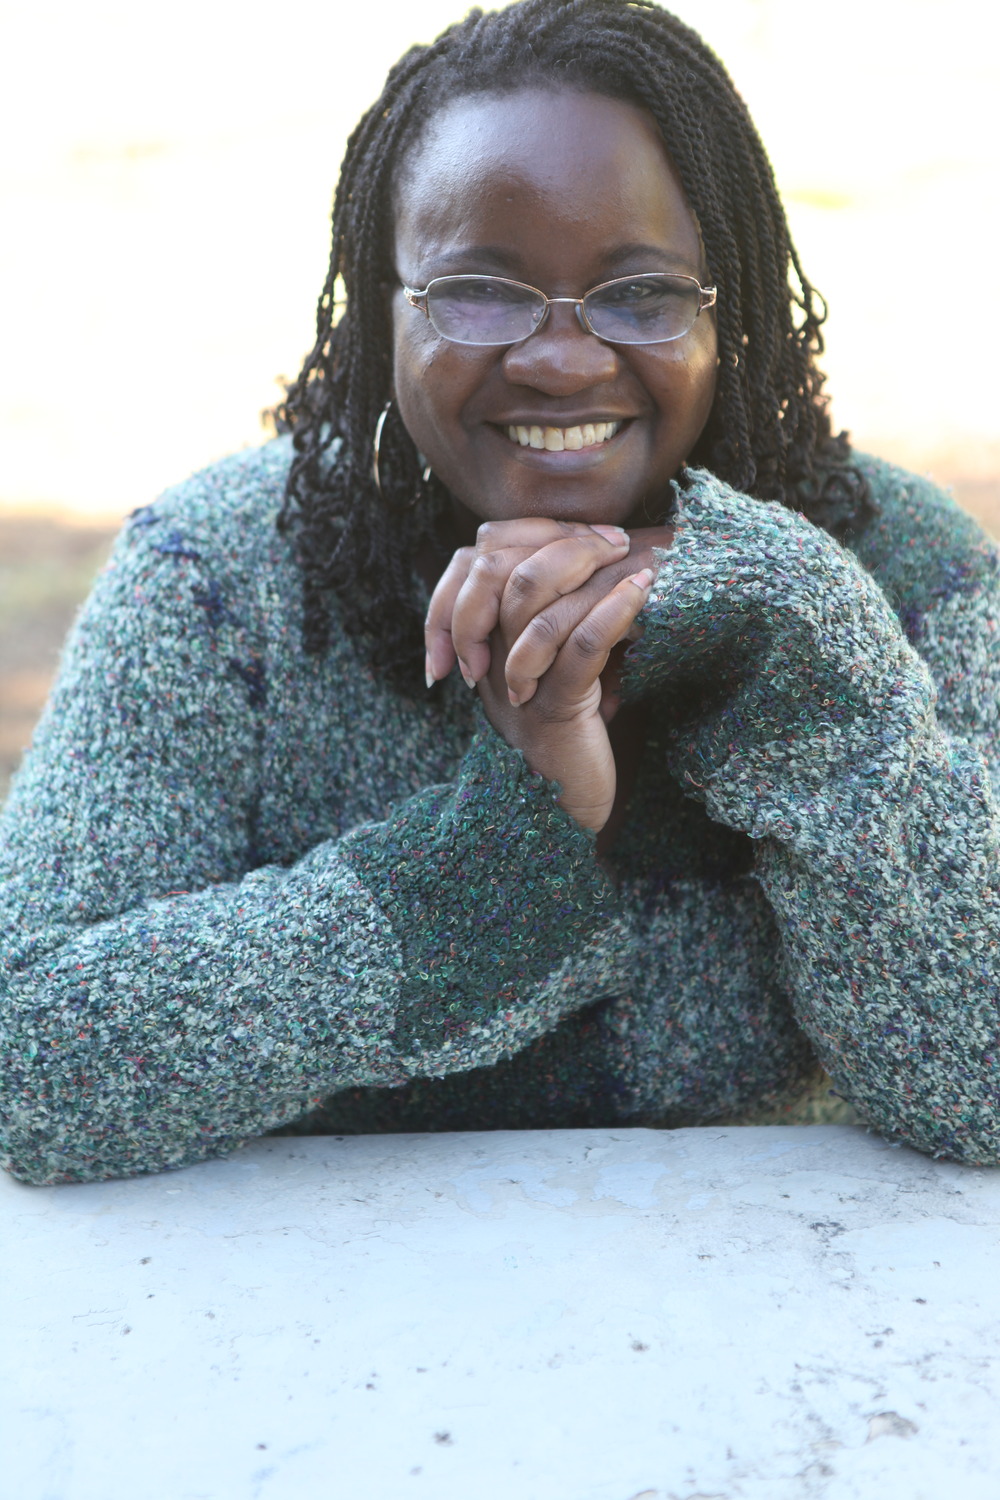 NJ Mvondo: Social Entrepreneur, Climate Resilience Planner, Certified Conflict Resolution Mediator. Chair of the Yolo County Climate Action Commission; Member: Yolo County Restorative Justice Partnership, Yolo Food Insecurity Coalition, CA Jobs First Sacramento/Yolo Subregion Committee...